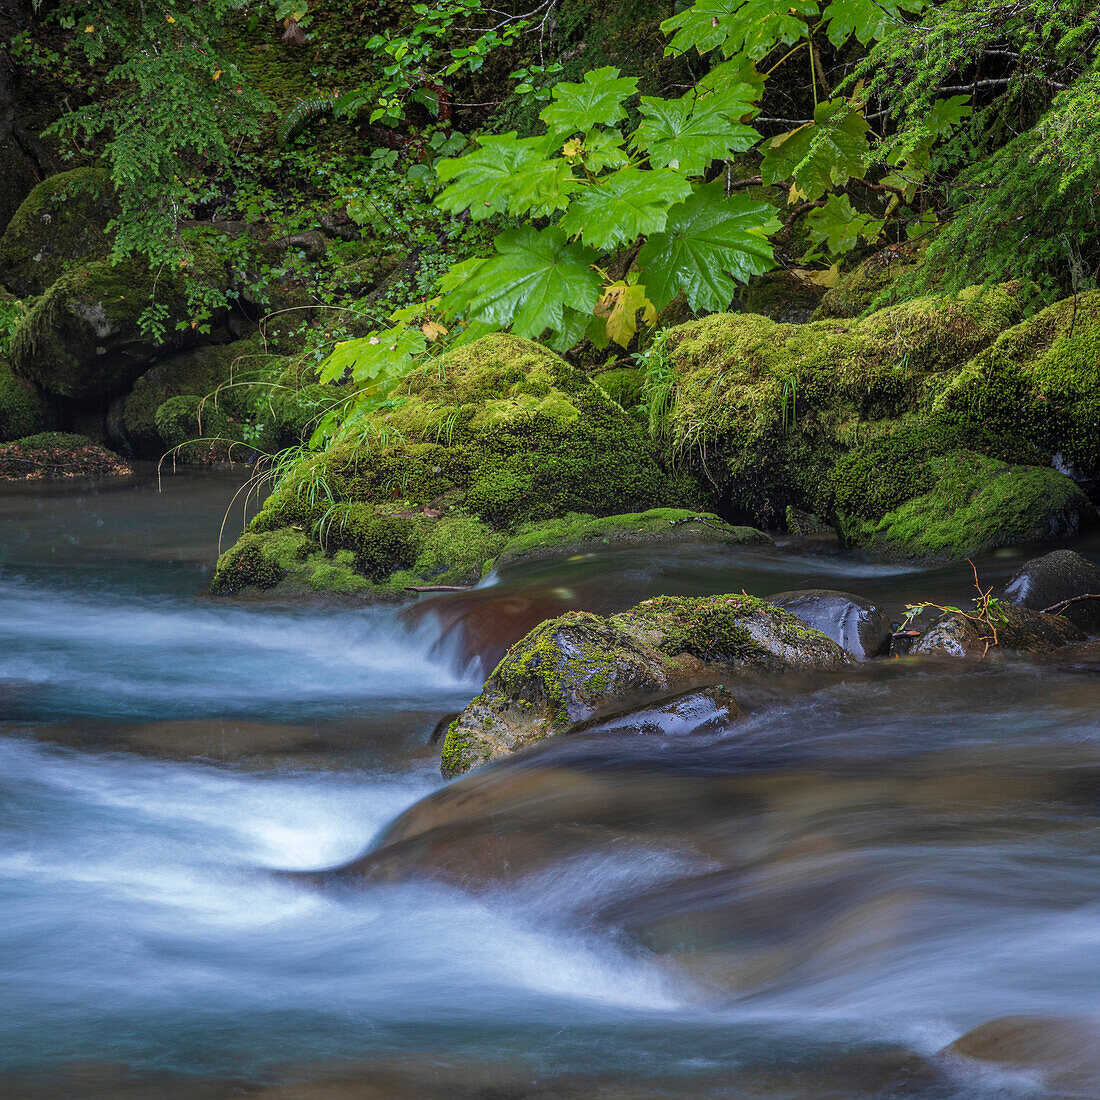 USA, Washington State, Olympic National Park. Dungeness River rapids